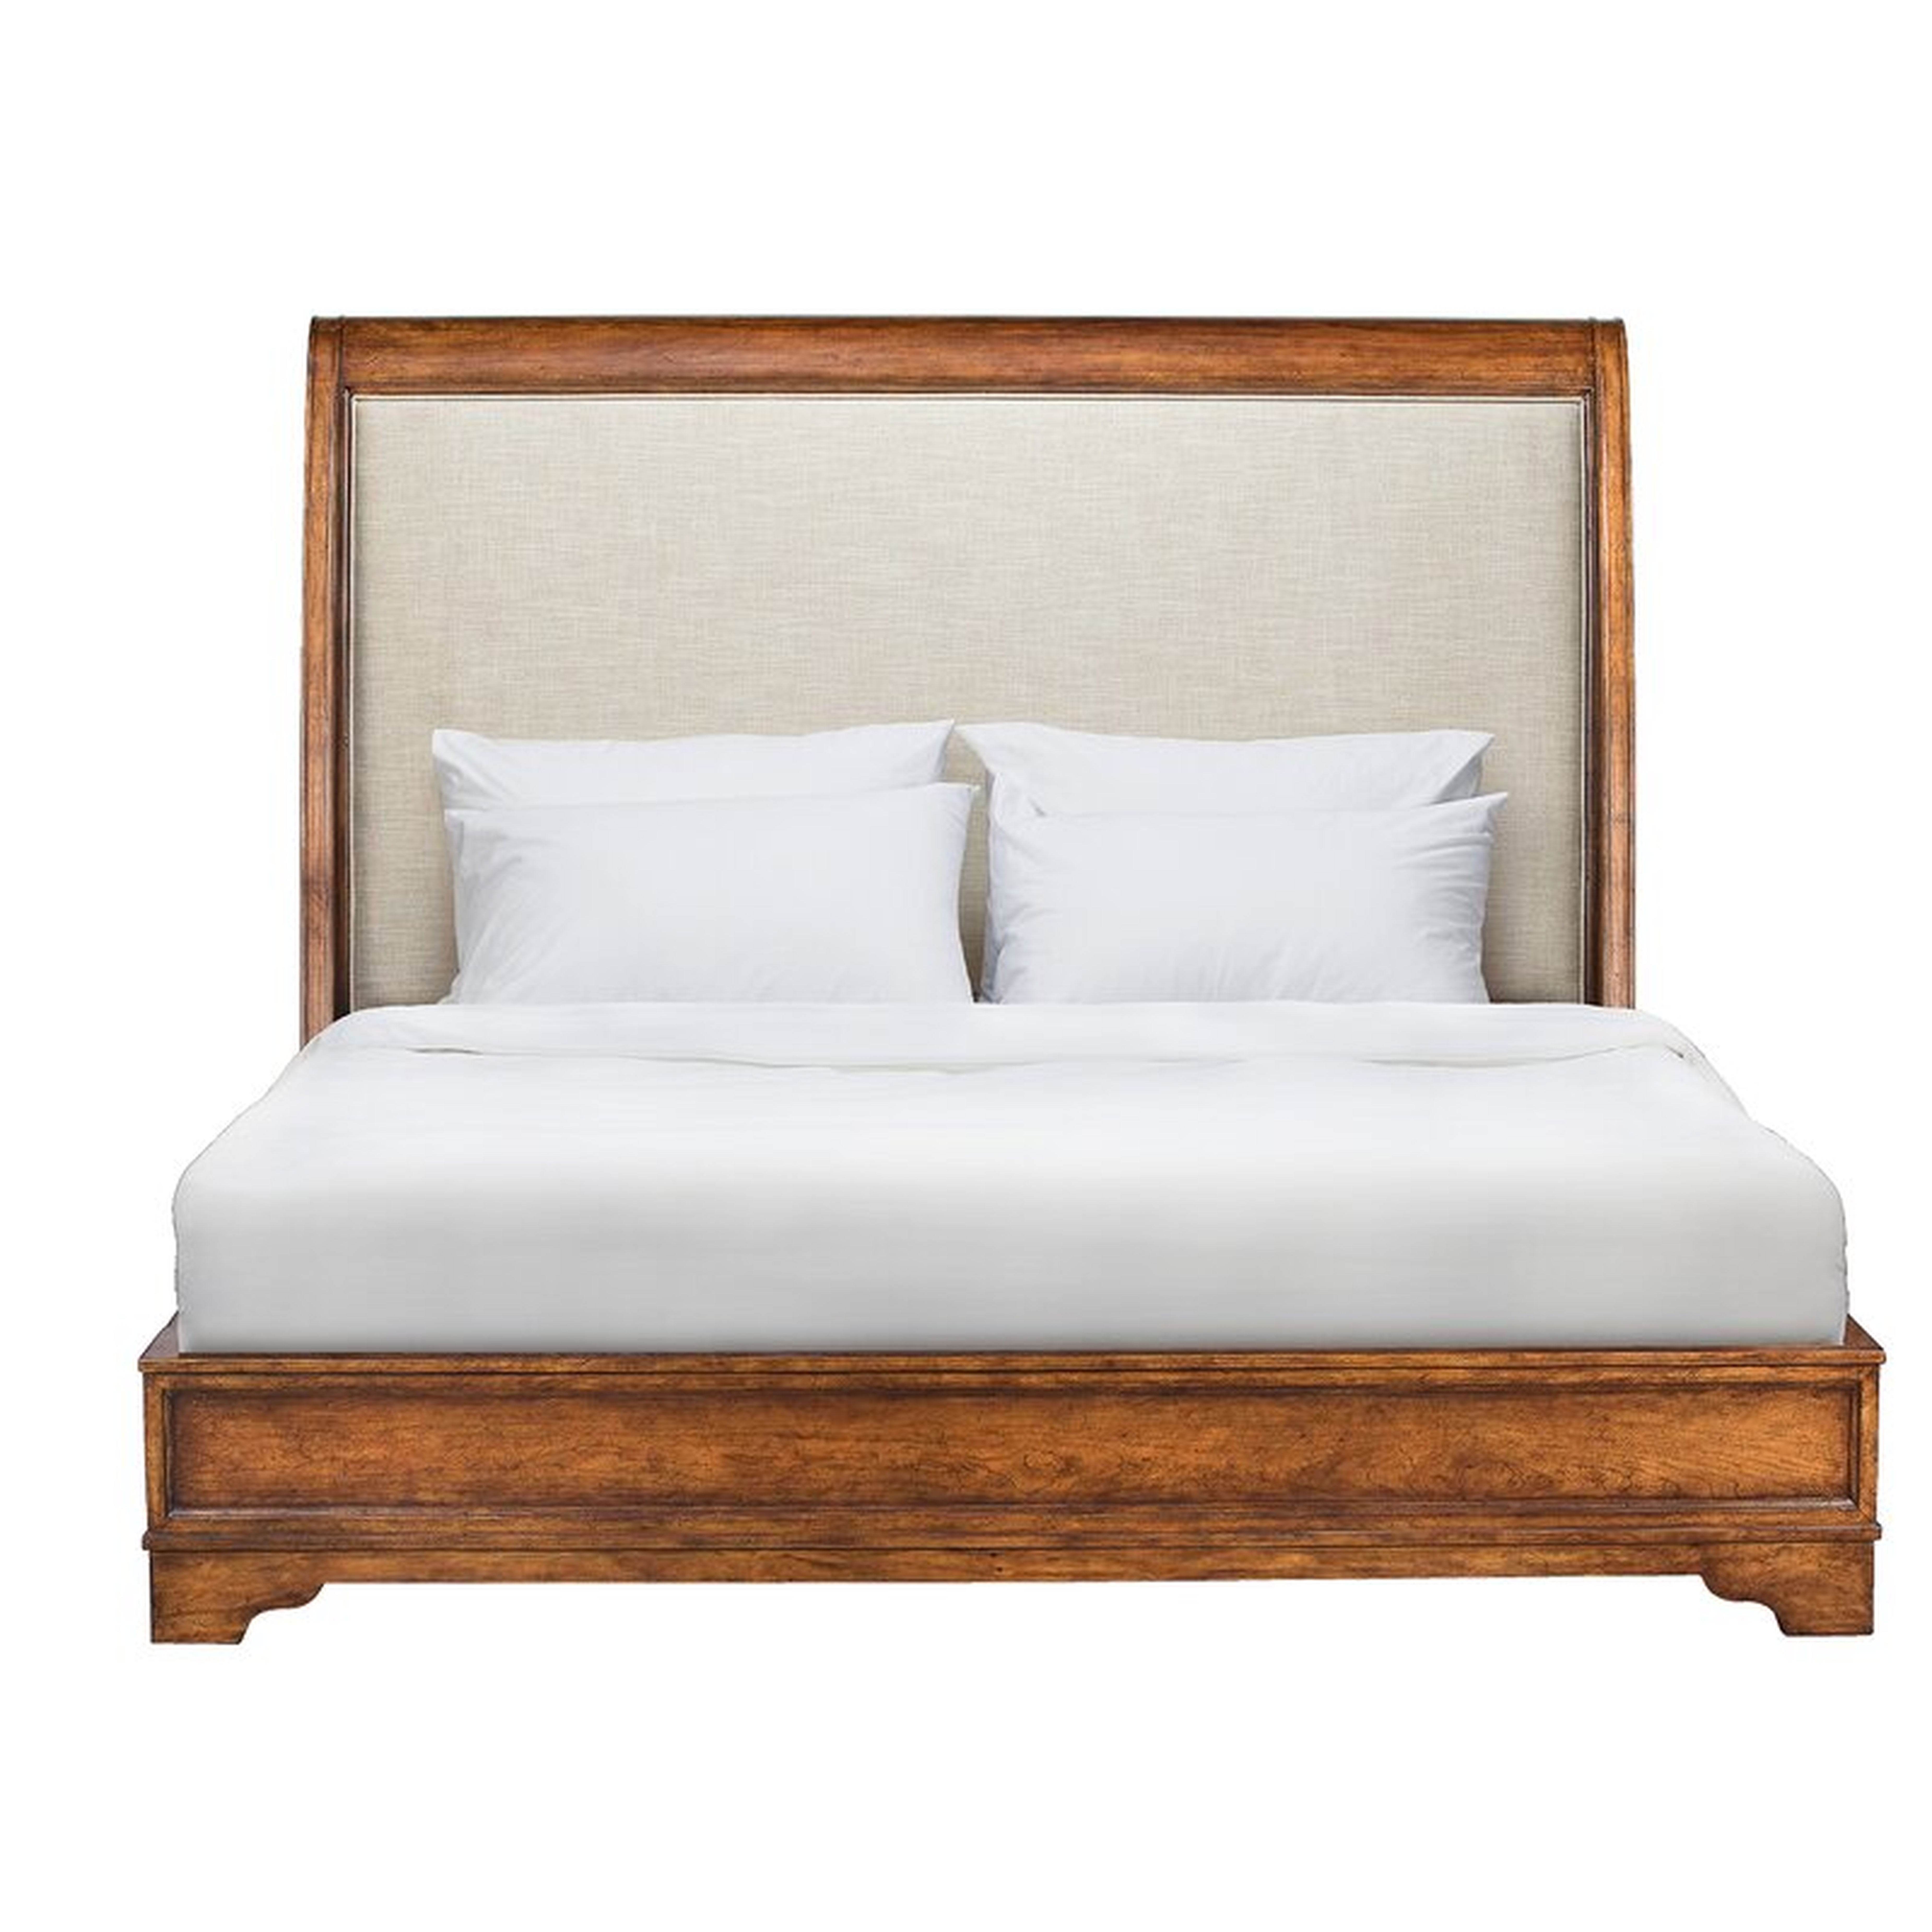 Louis Philippe Peninsula Upholstered Sleigh Bed Size: King, Color: Cherry - Perigold